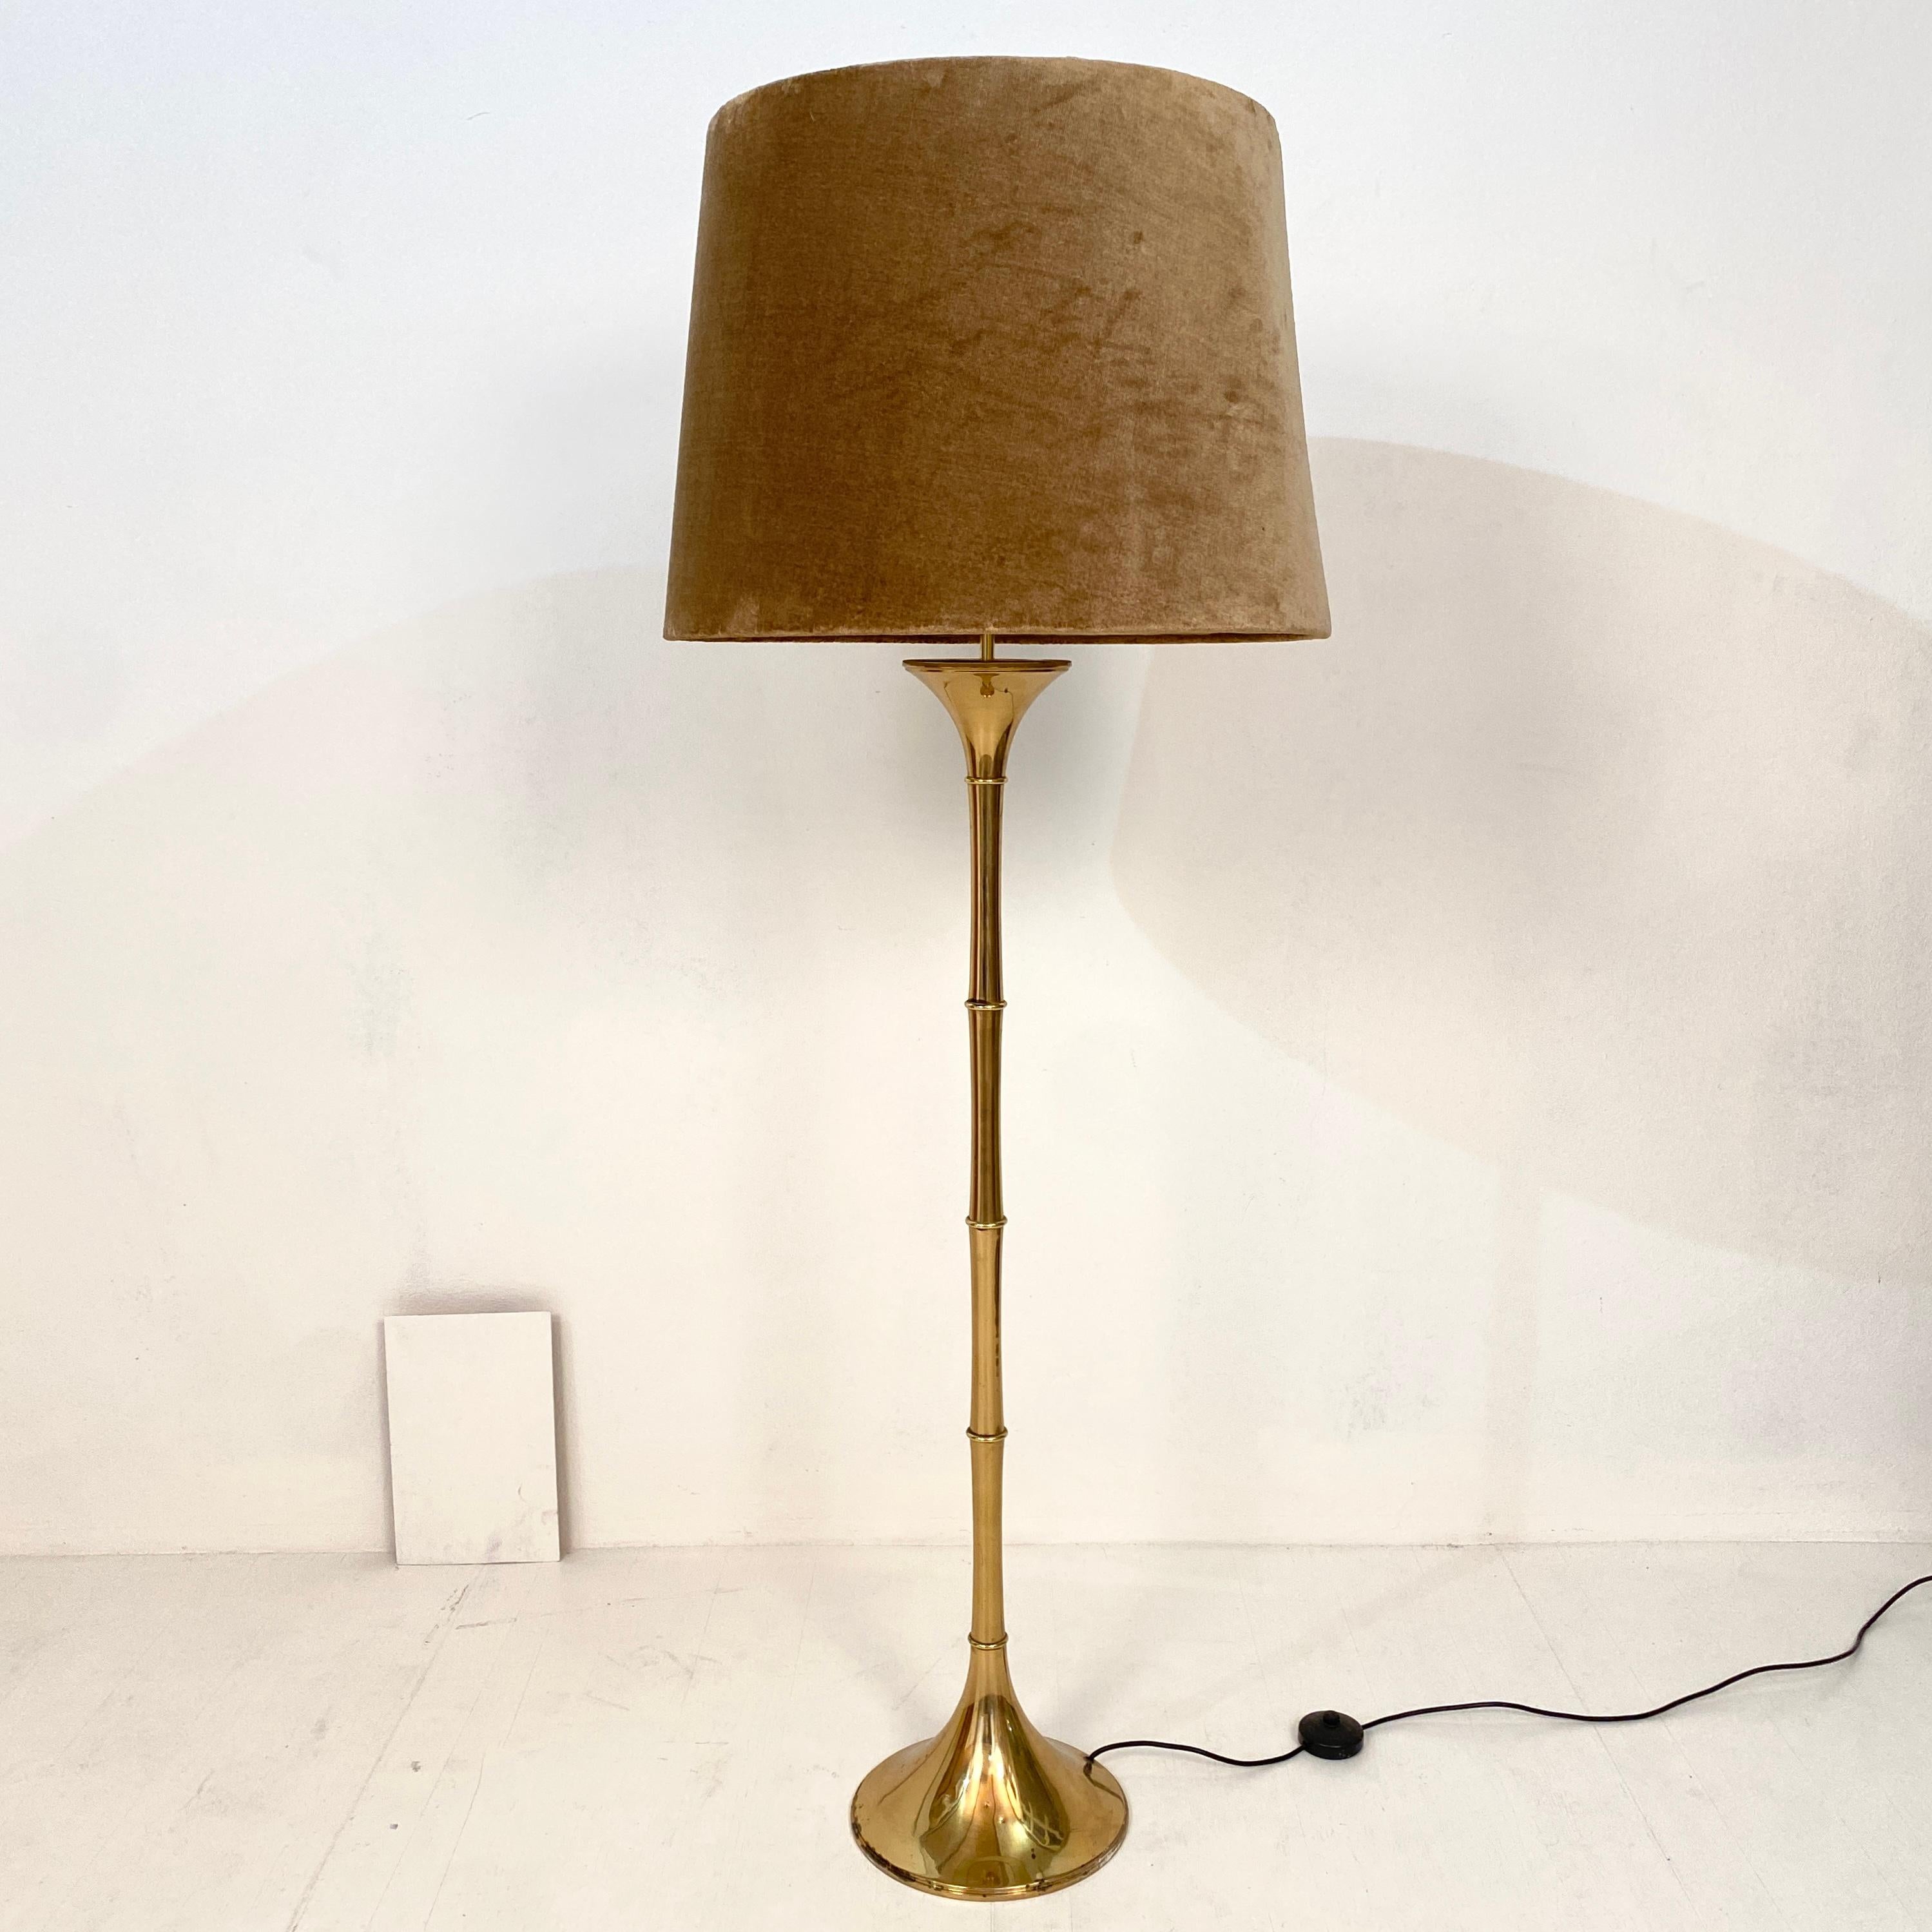 This midcentury German brass floor lamps ‘Bamboo Ml 1 F’ designed by Ingo Maurer in 1968 still retains its original velvet lamp shade.
A unique piece which is a great eye-catcher for your antique, modern, space age or midcentury interior.
All